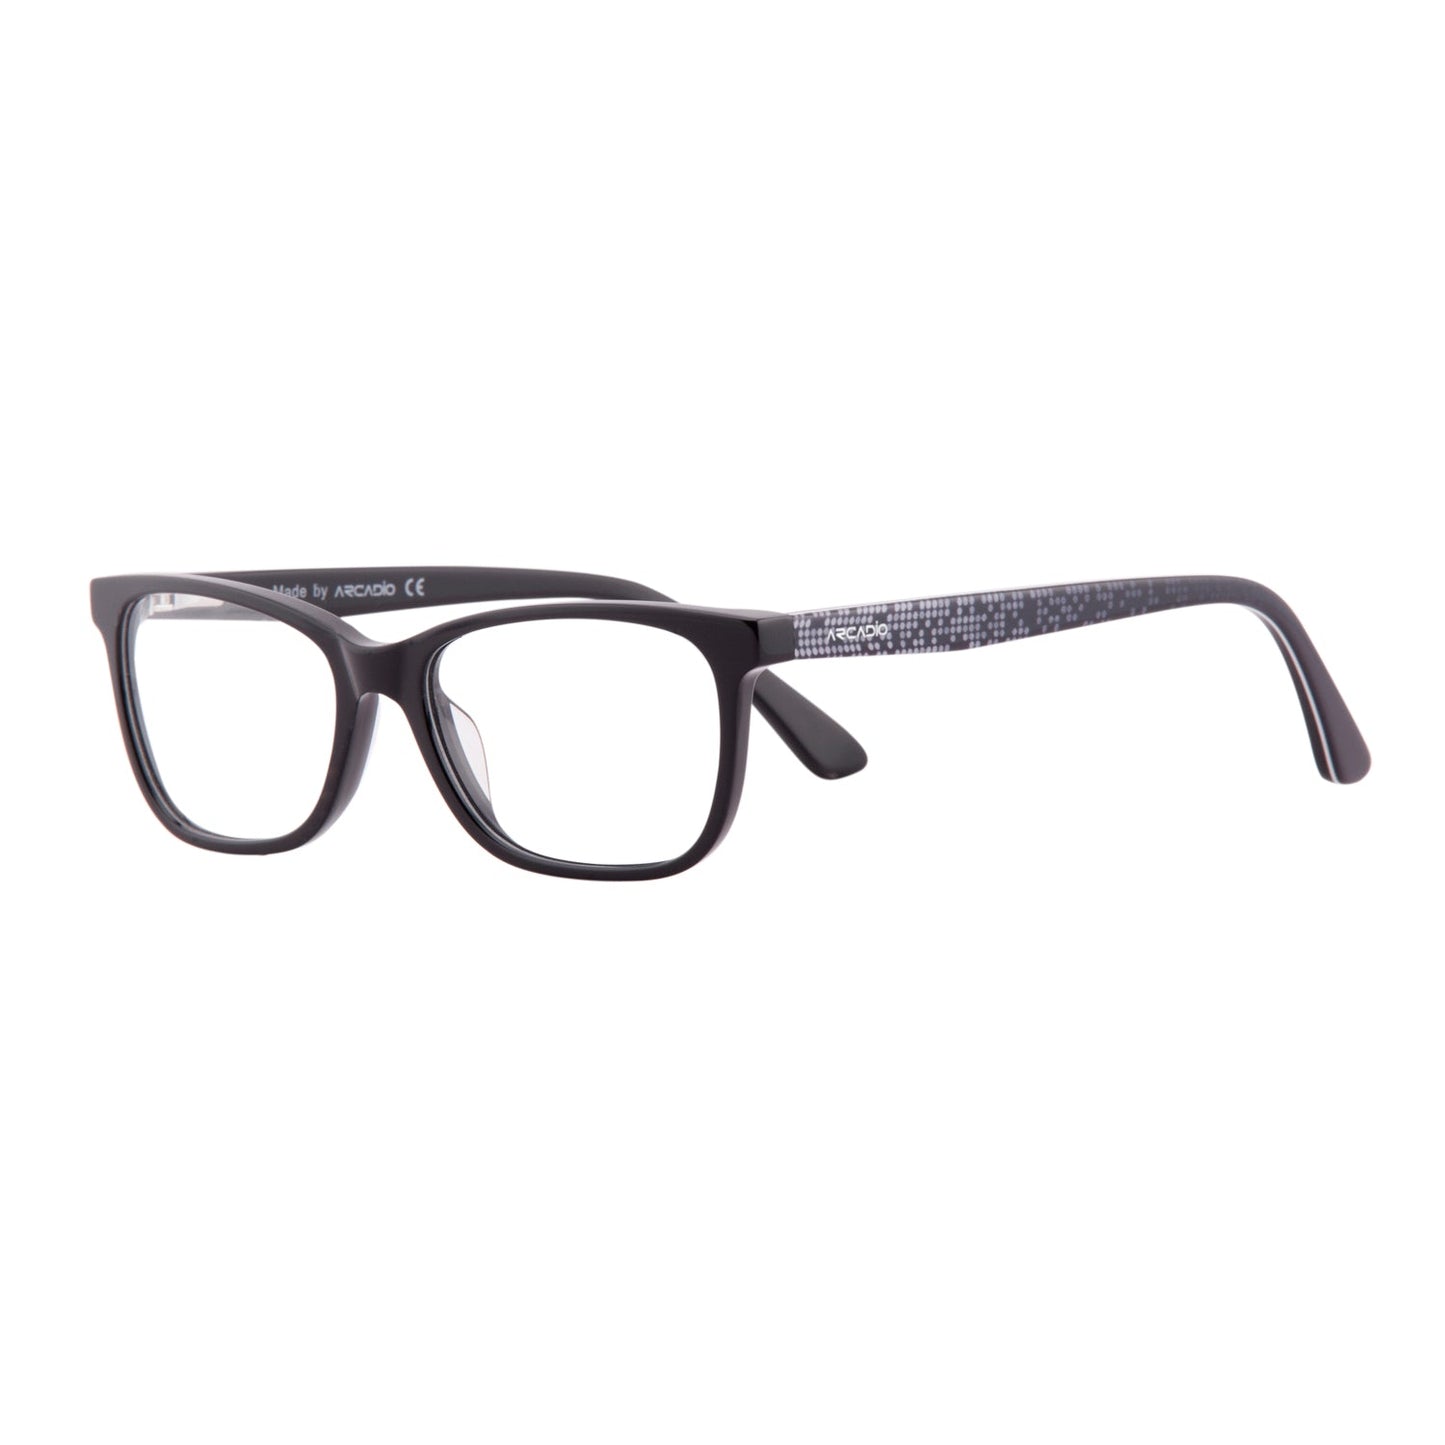 AUDREY Modified Cat-eye Frame for women SF496 ARCADIO